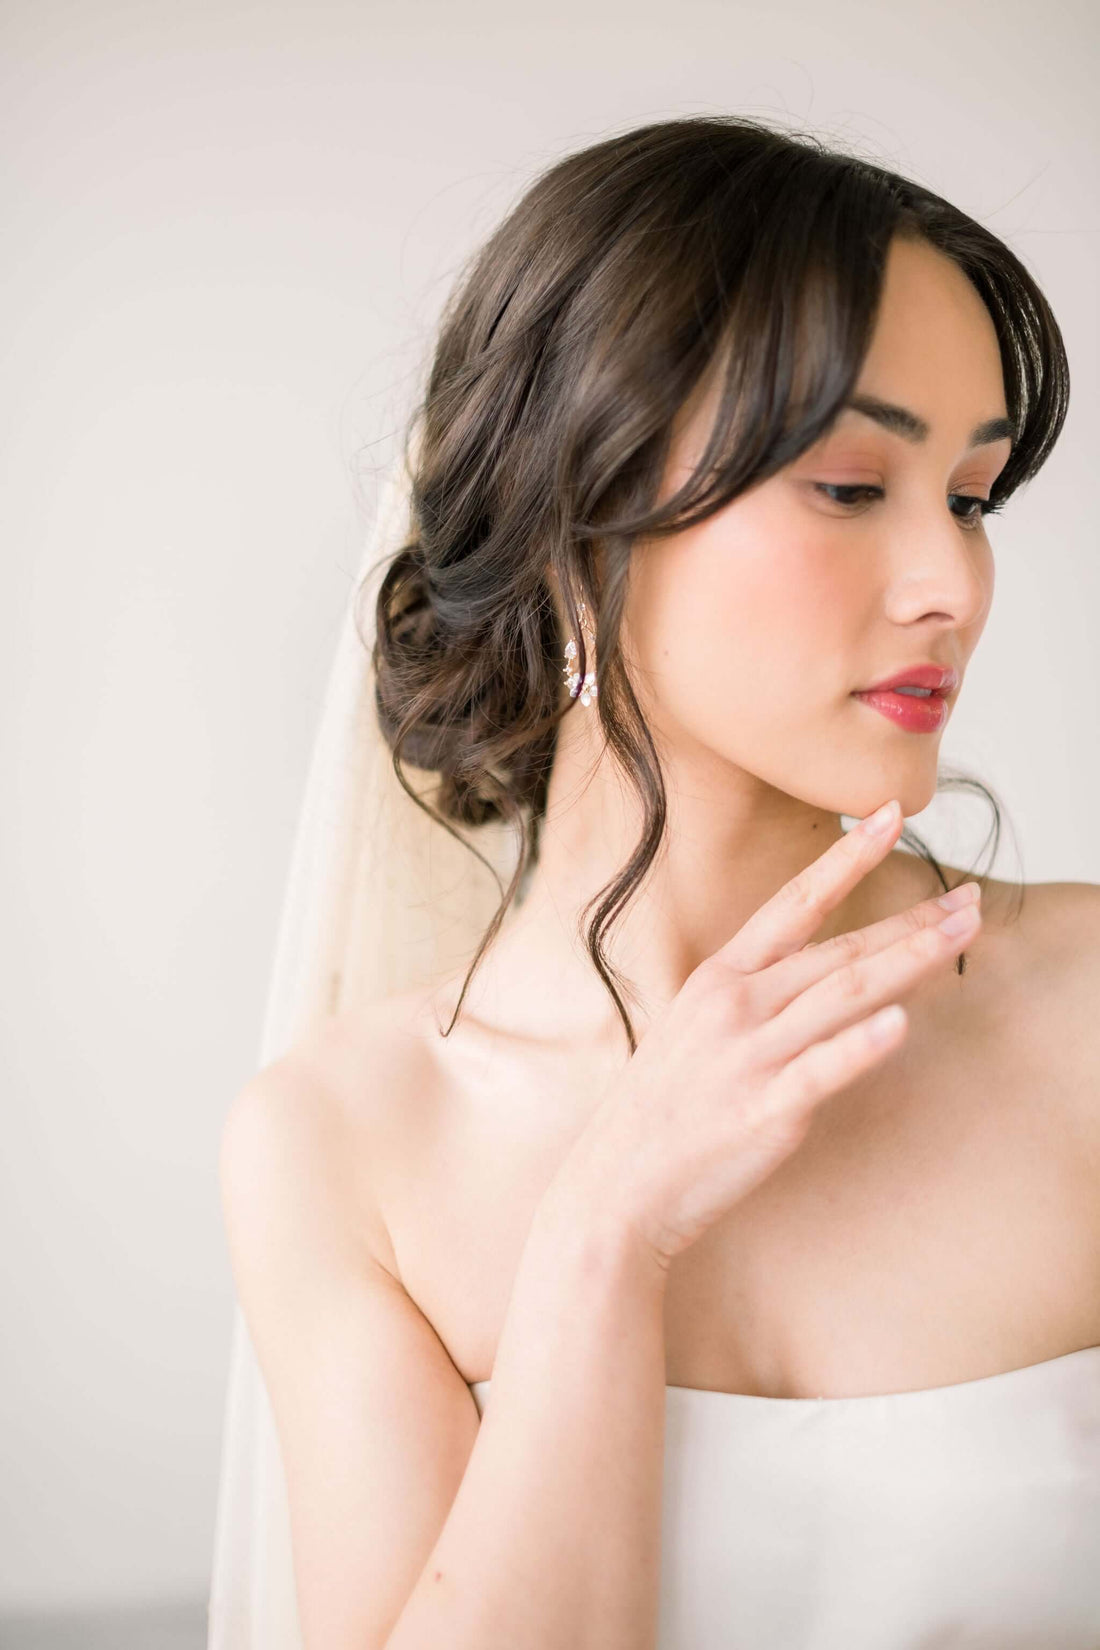 What lengths do wedding veils come in? Wedding veil questions answered Tessa Kim